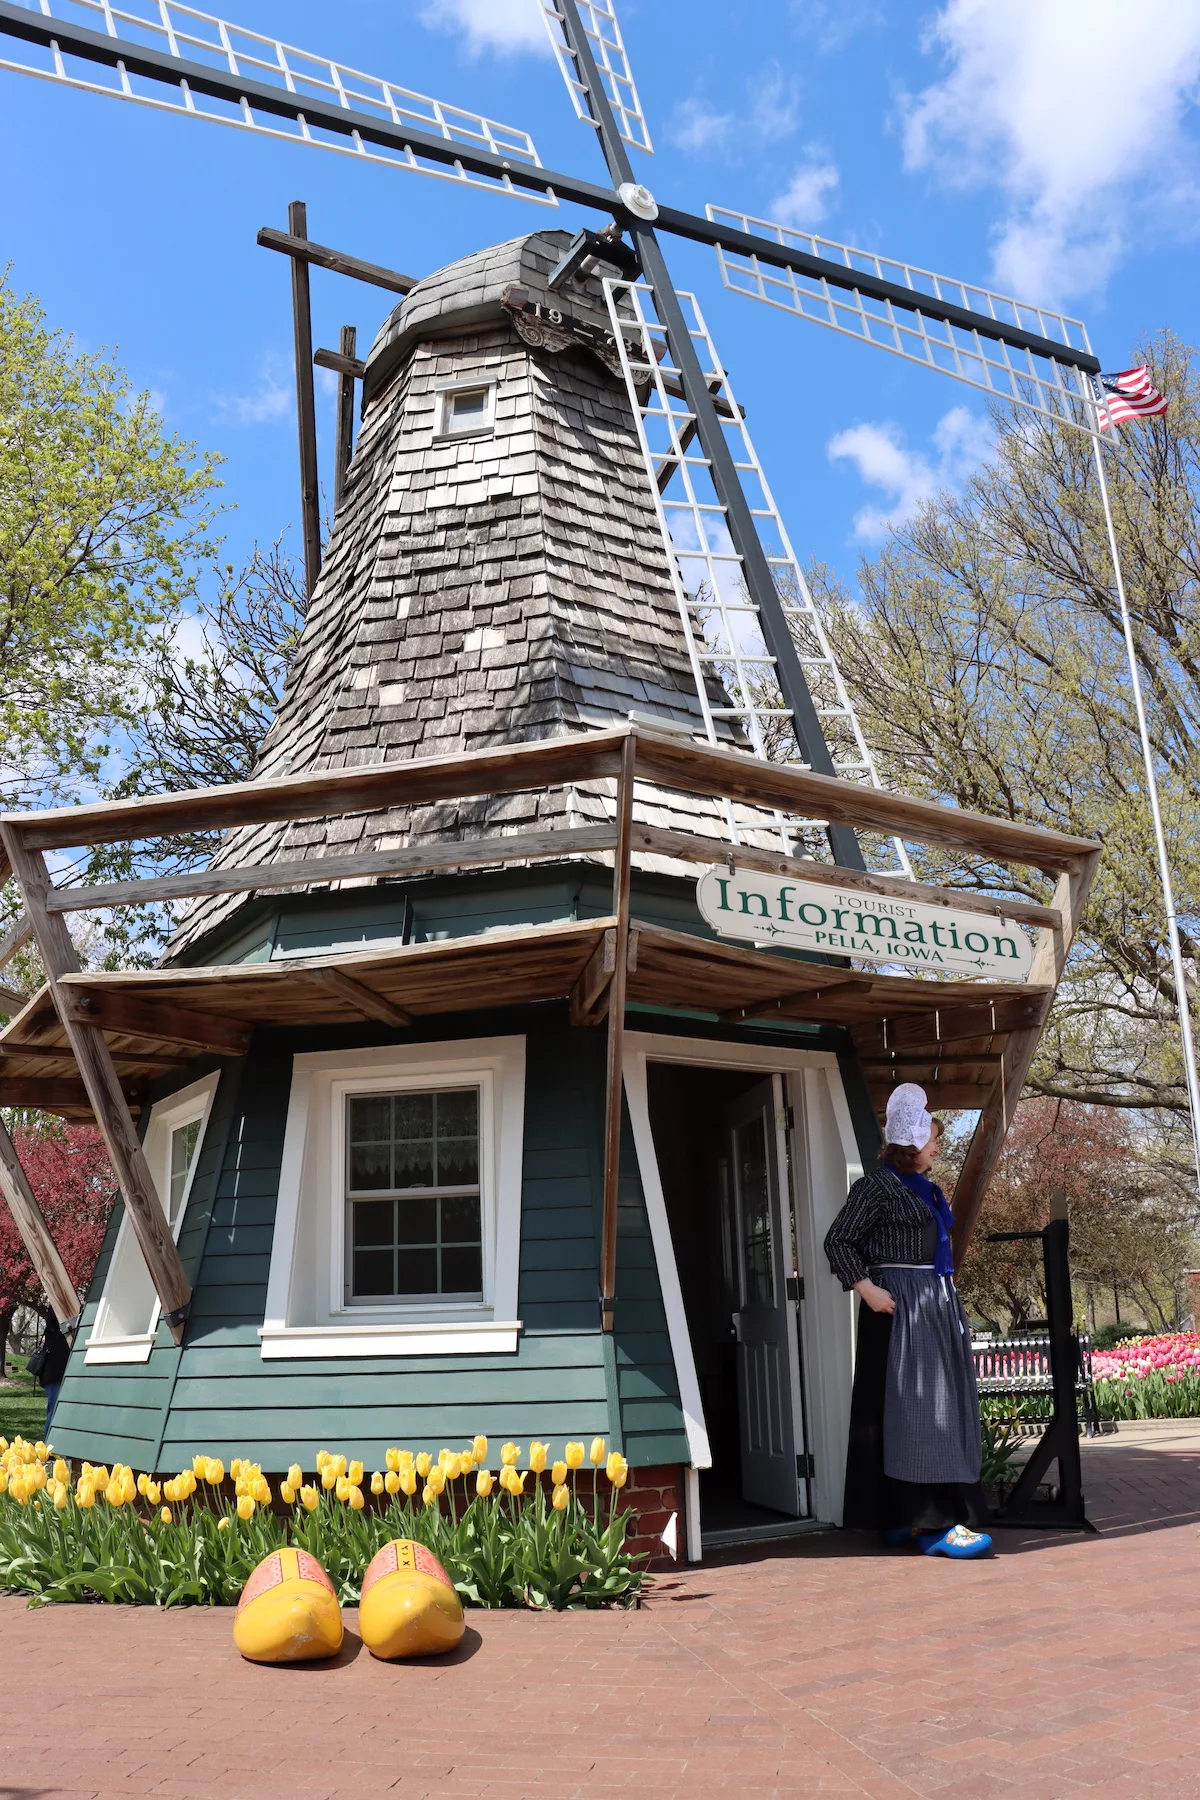 Miniature windmill with giant wooden shoes in Central Park in Pella, Iowa